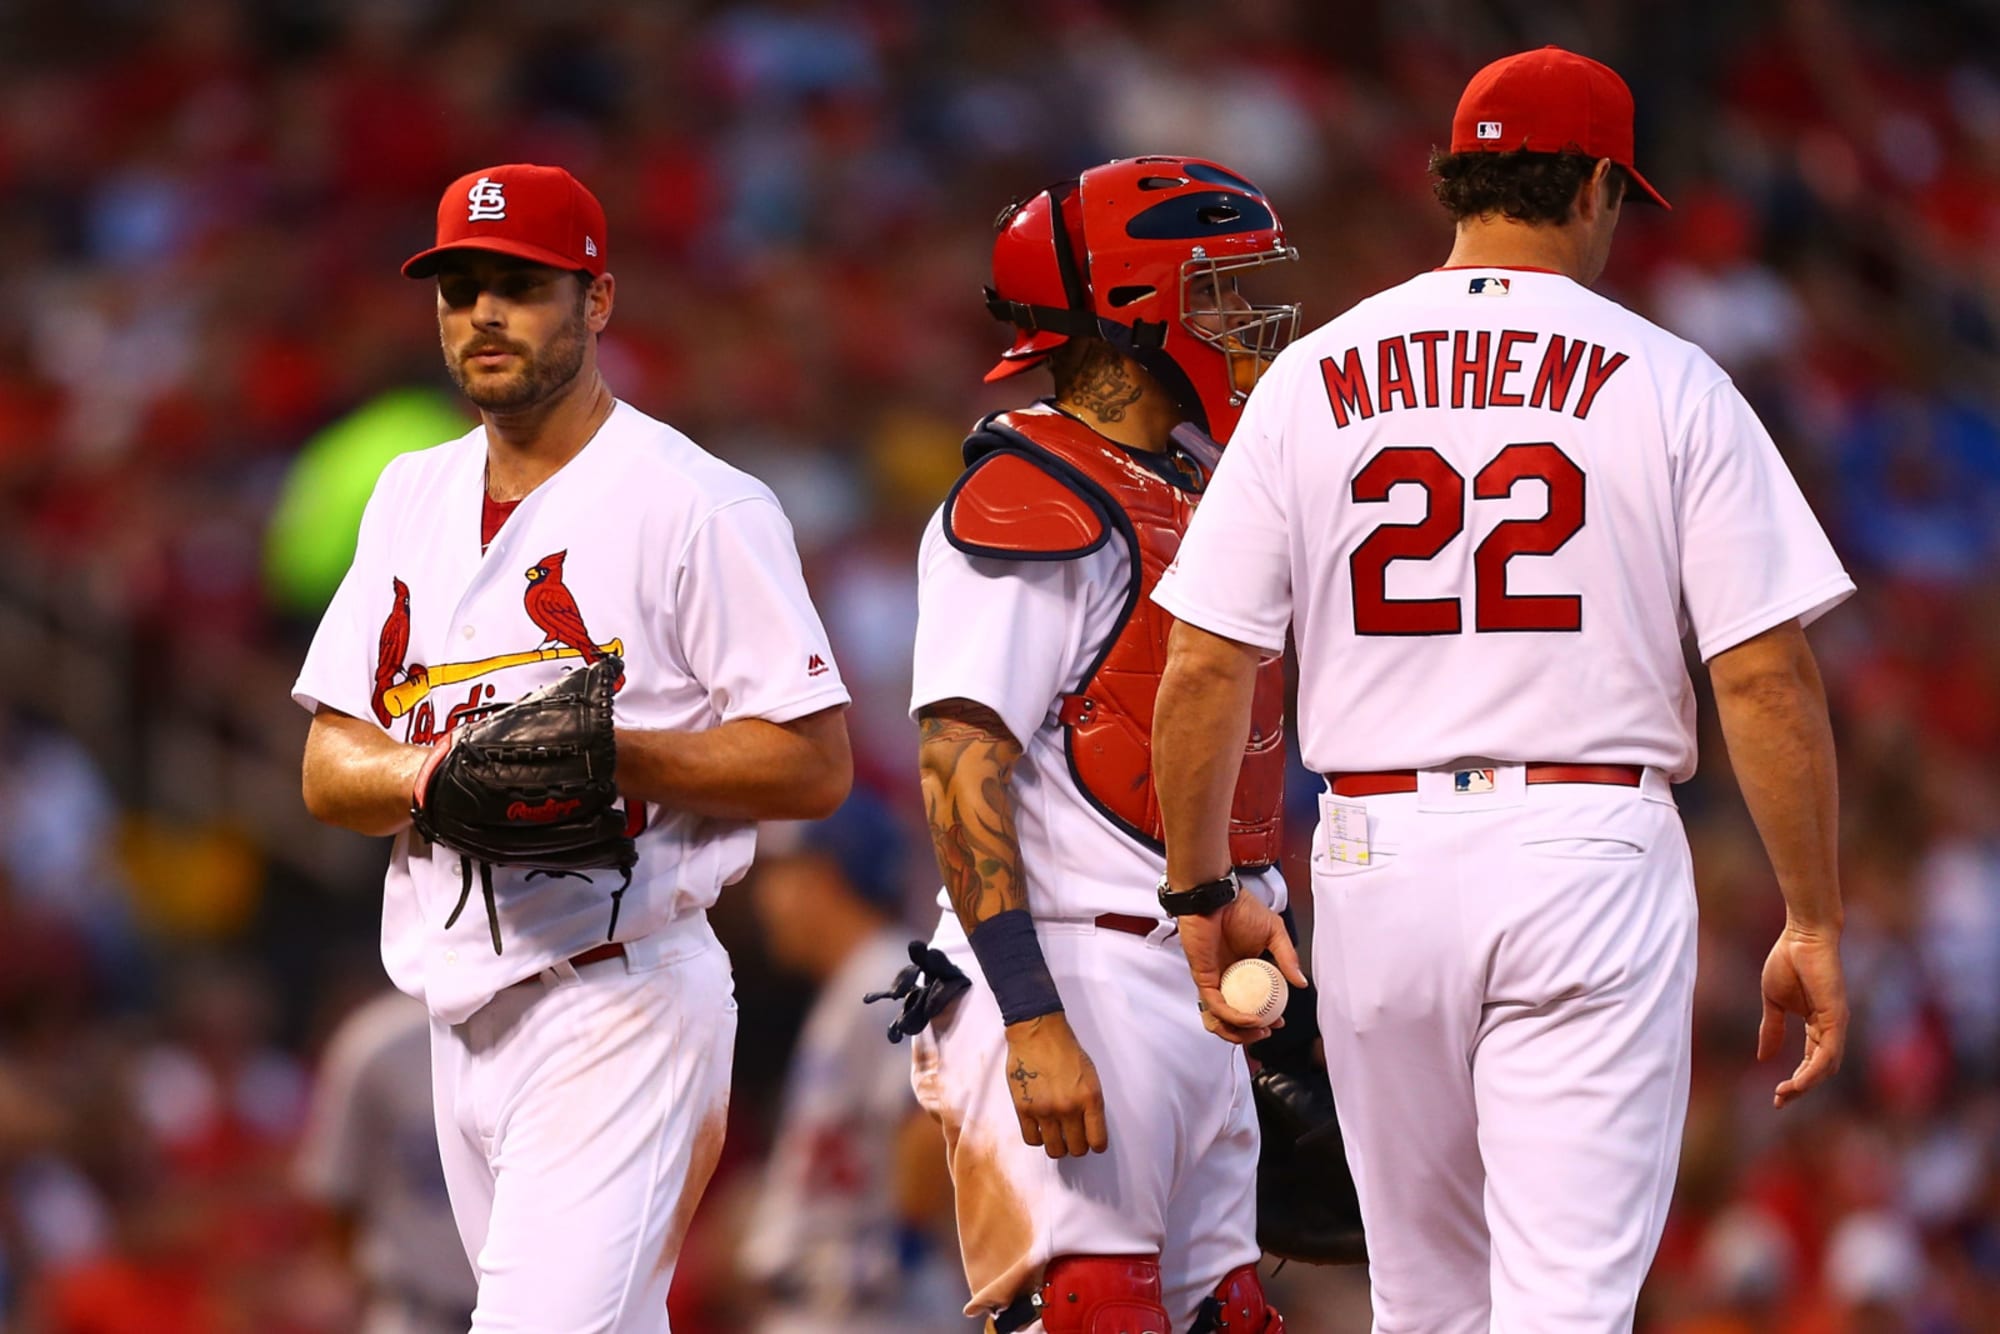 St. Louis Cardinals: Questions must be answered about Cardinal pitching